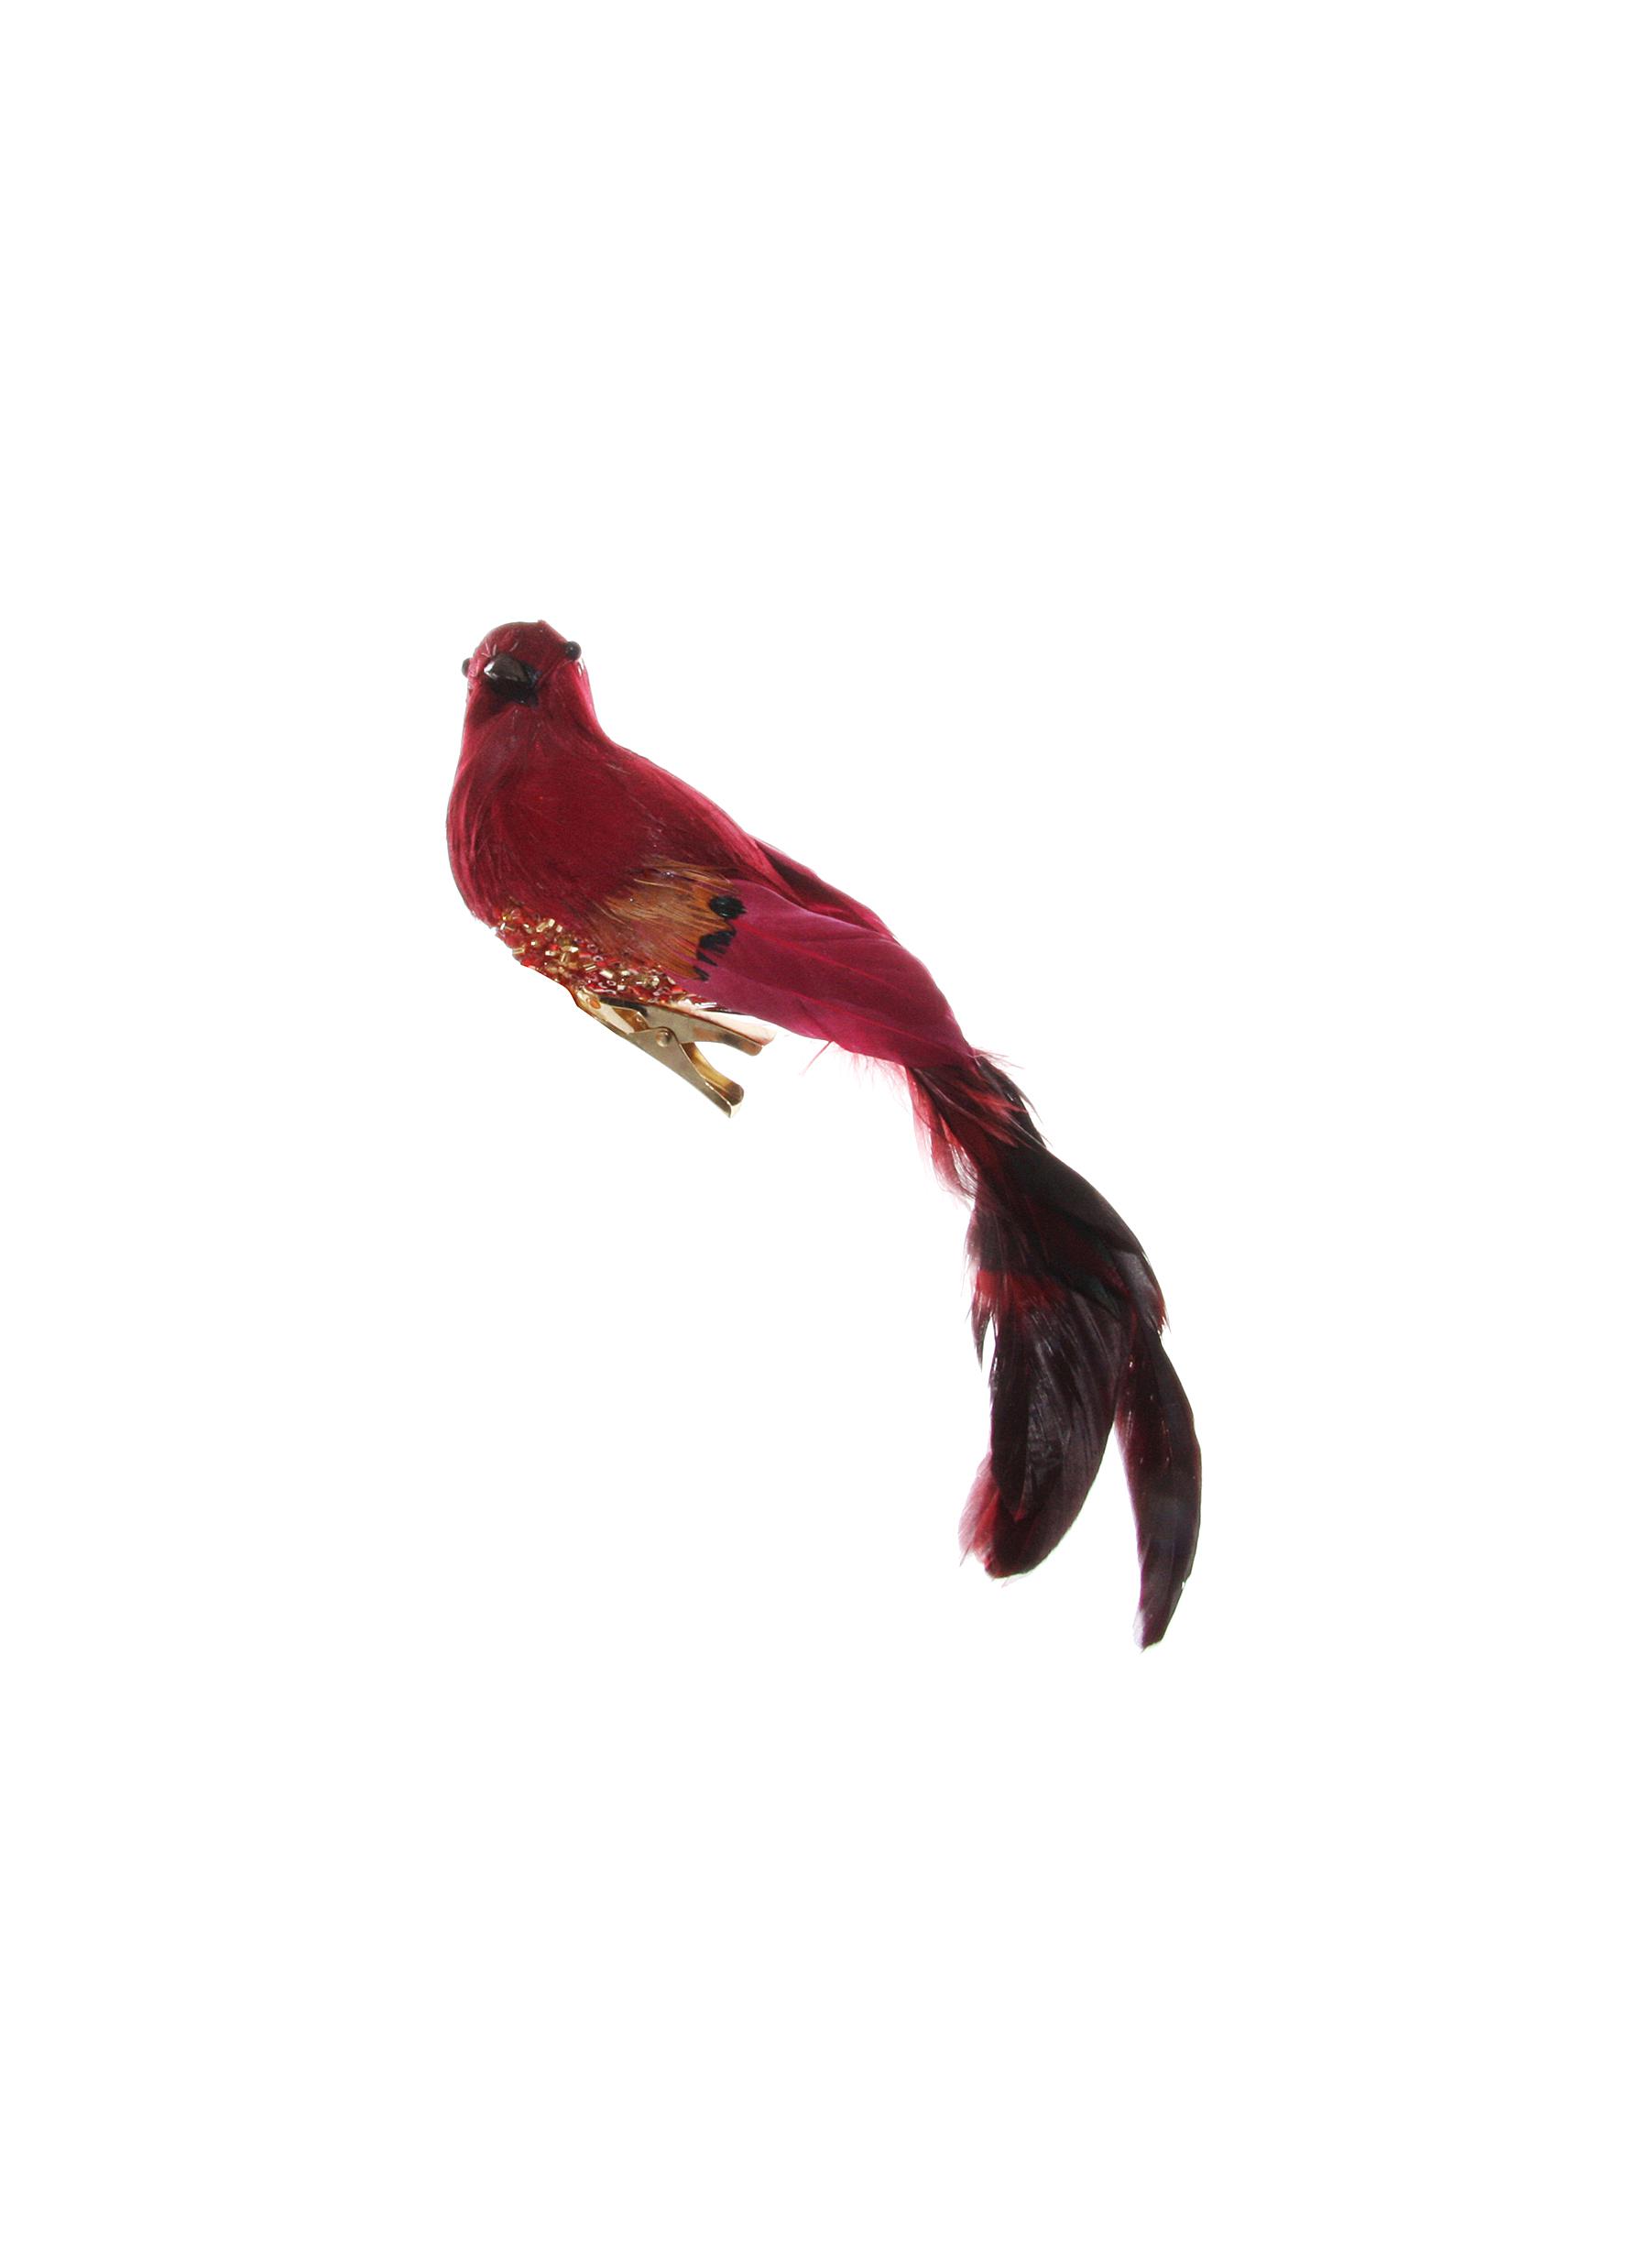 Feather Tail Beaded Body Bird Ornament - Burgundy/Gold